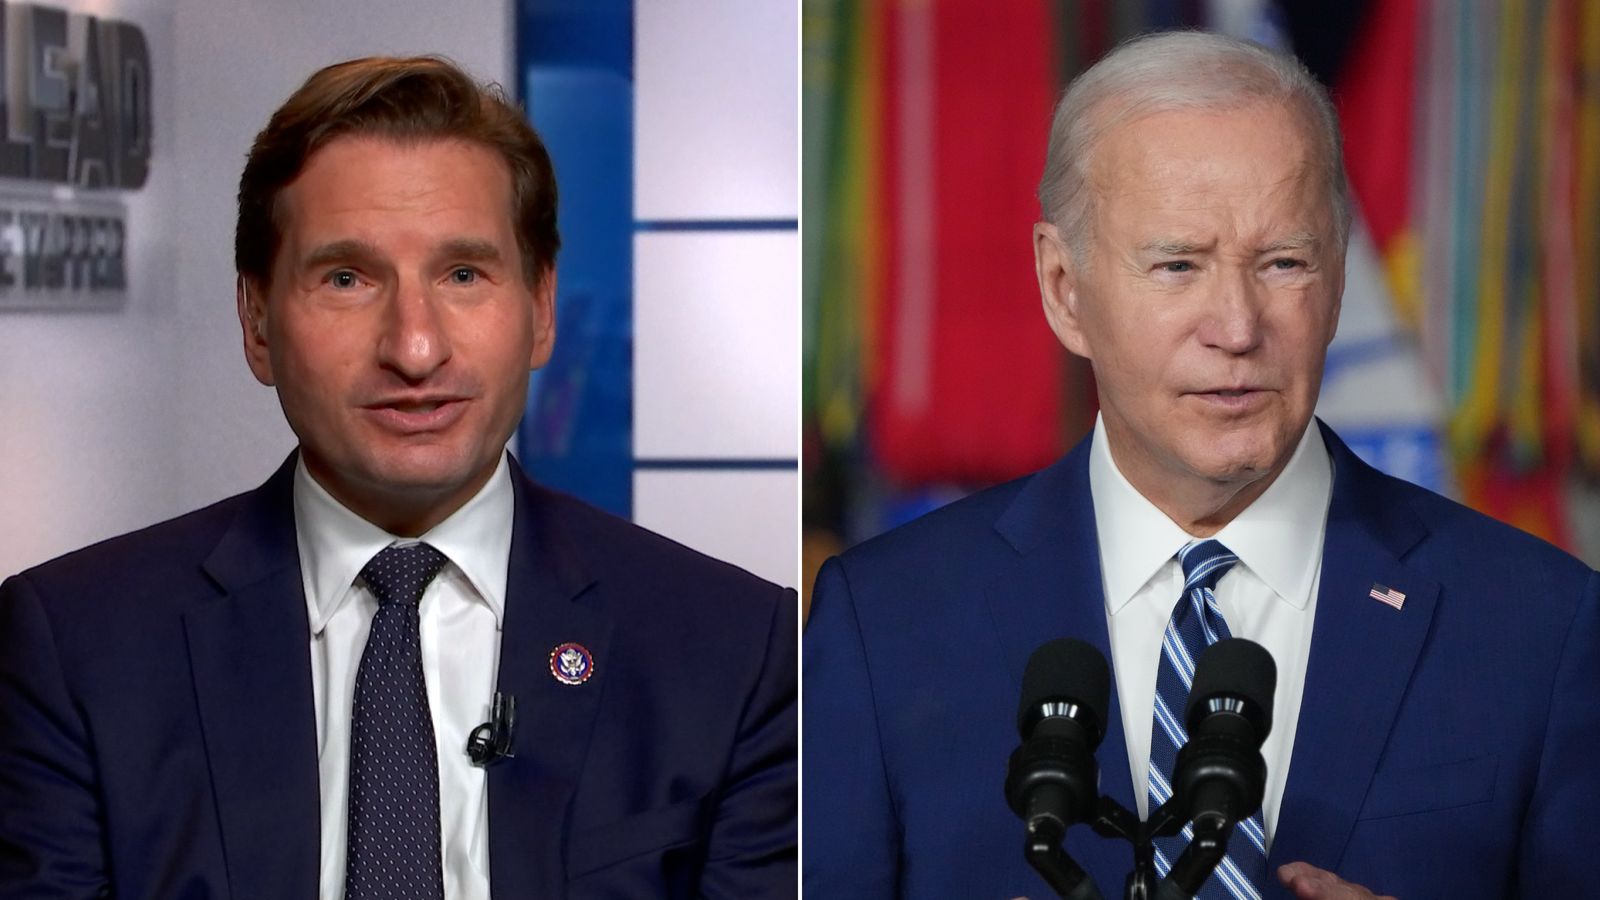 Biden opponent Dean Phillips sees little support from past donors